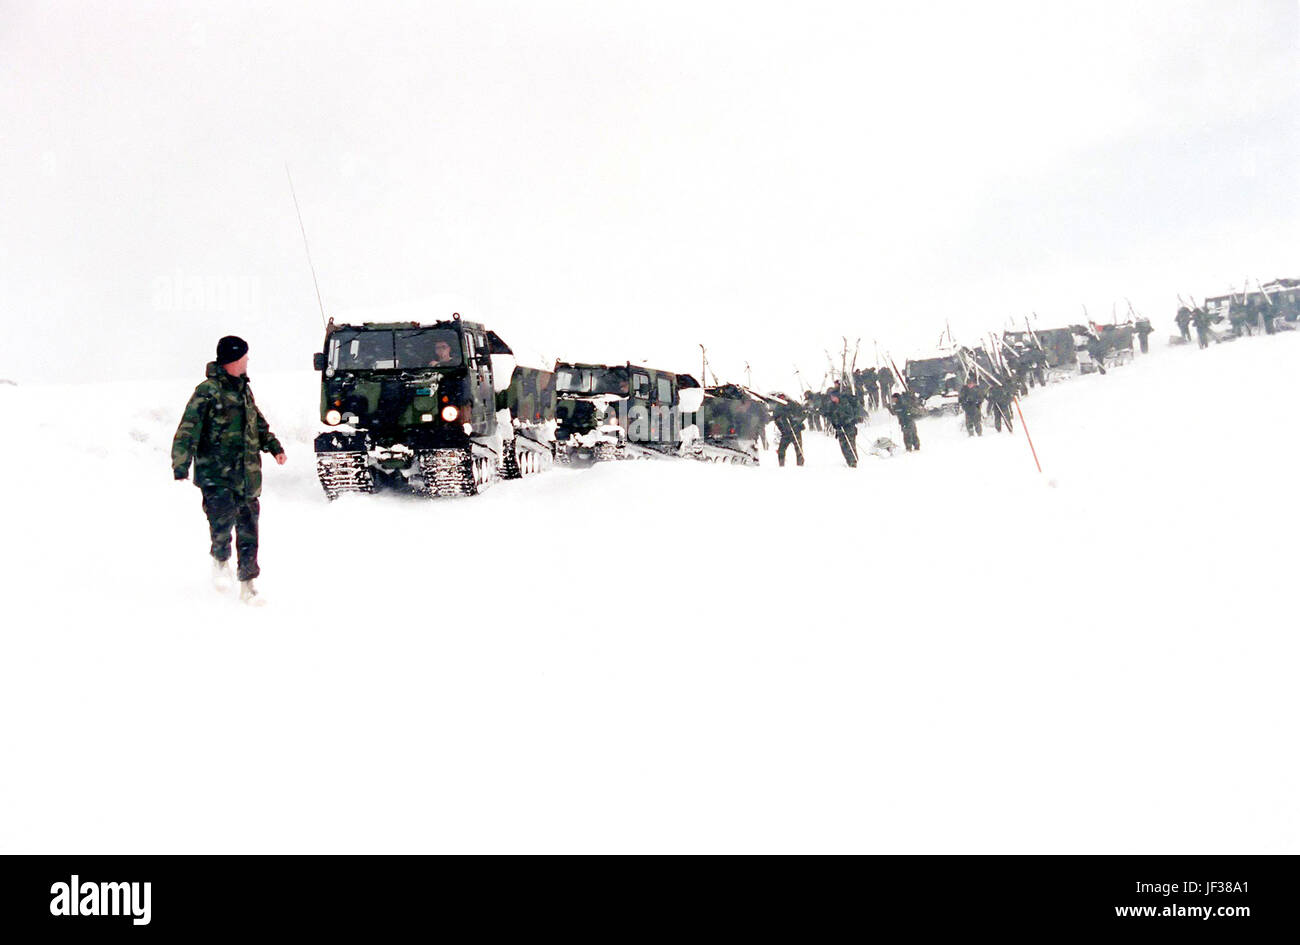 970126-M-8708Y-003 Marines from 2nd Marine Regiment head back down to base camp at the Mountain Warfare Training Center, Bridgeport, Calif., as near white-out conditions set in on Jan. 26, 1997.   Training is suspended in the poor weather conditions for safety reasons.   Marines from the 2nd Marine Regiment and 3rd Battalion, 8th Marines of Camp Lejeune, N. C. are at the Mountain Warfare Training Center, Bridgeport, Calif., to train in cold weather survival and arctic warfare.  DoD photo by Lance Cpl. E.J. Young, U.S. Marine Corps. Stock Photo